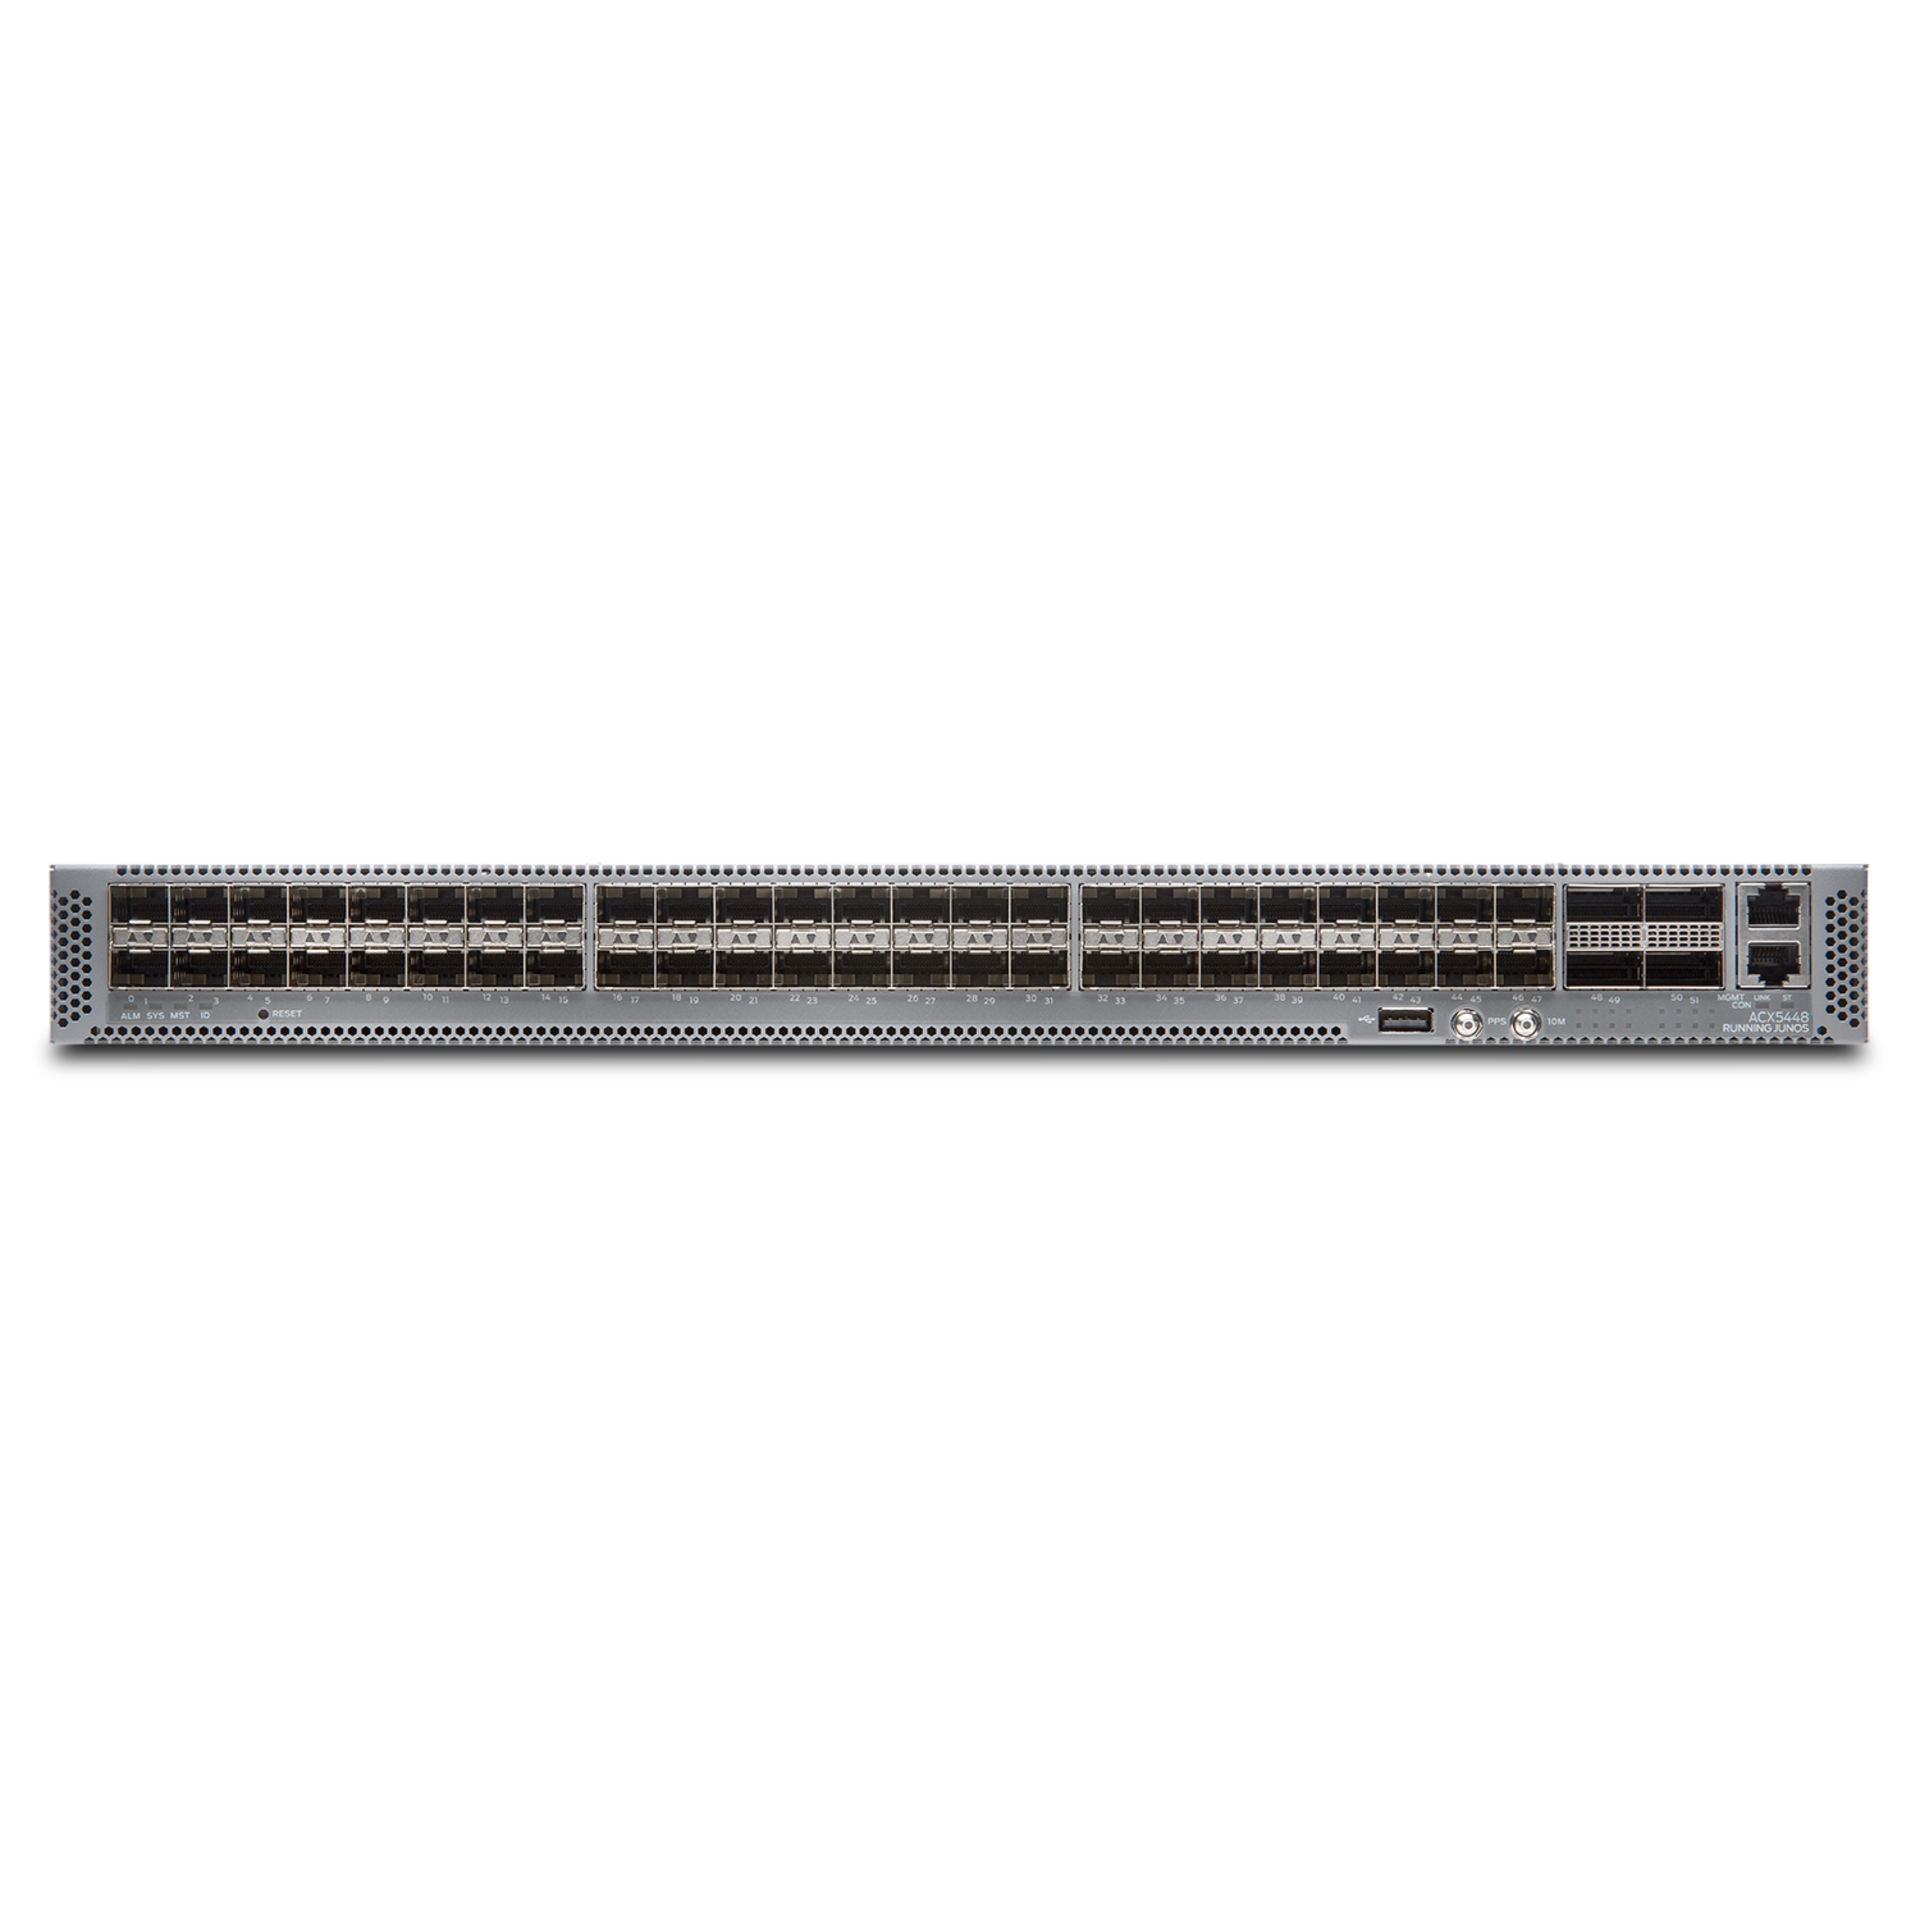 Маршрутизатор ACX5448, 48 SFP+/SFP ports, 4 QSFP28 ports, redundant fans and AC power supplies